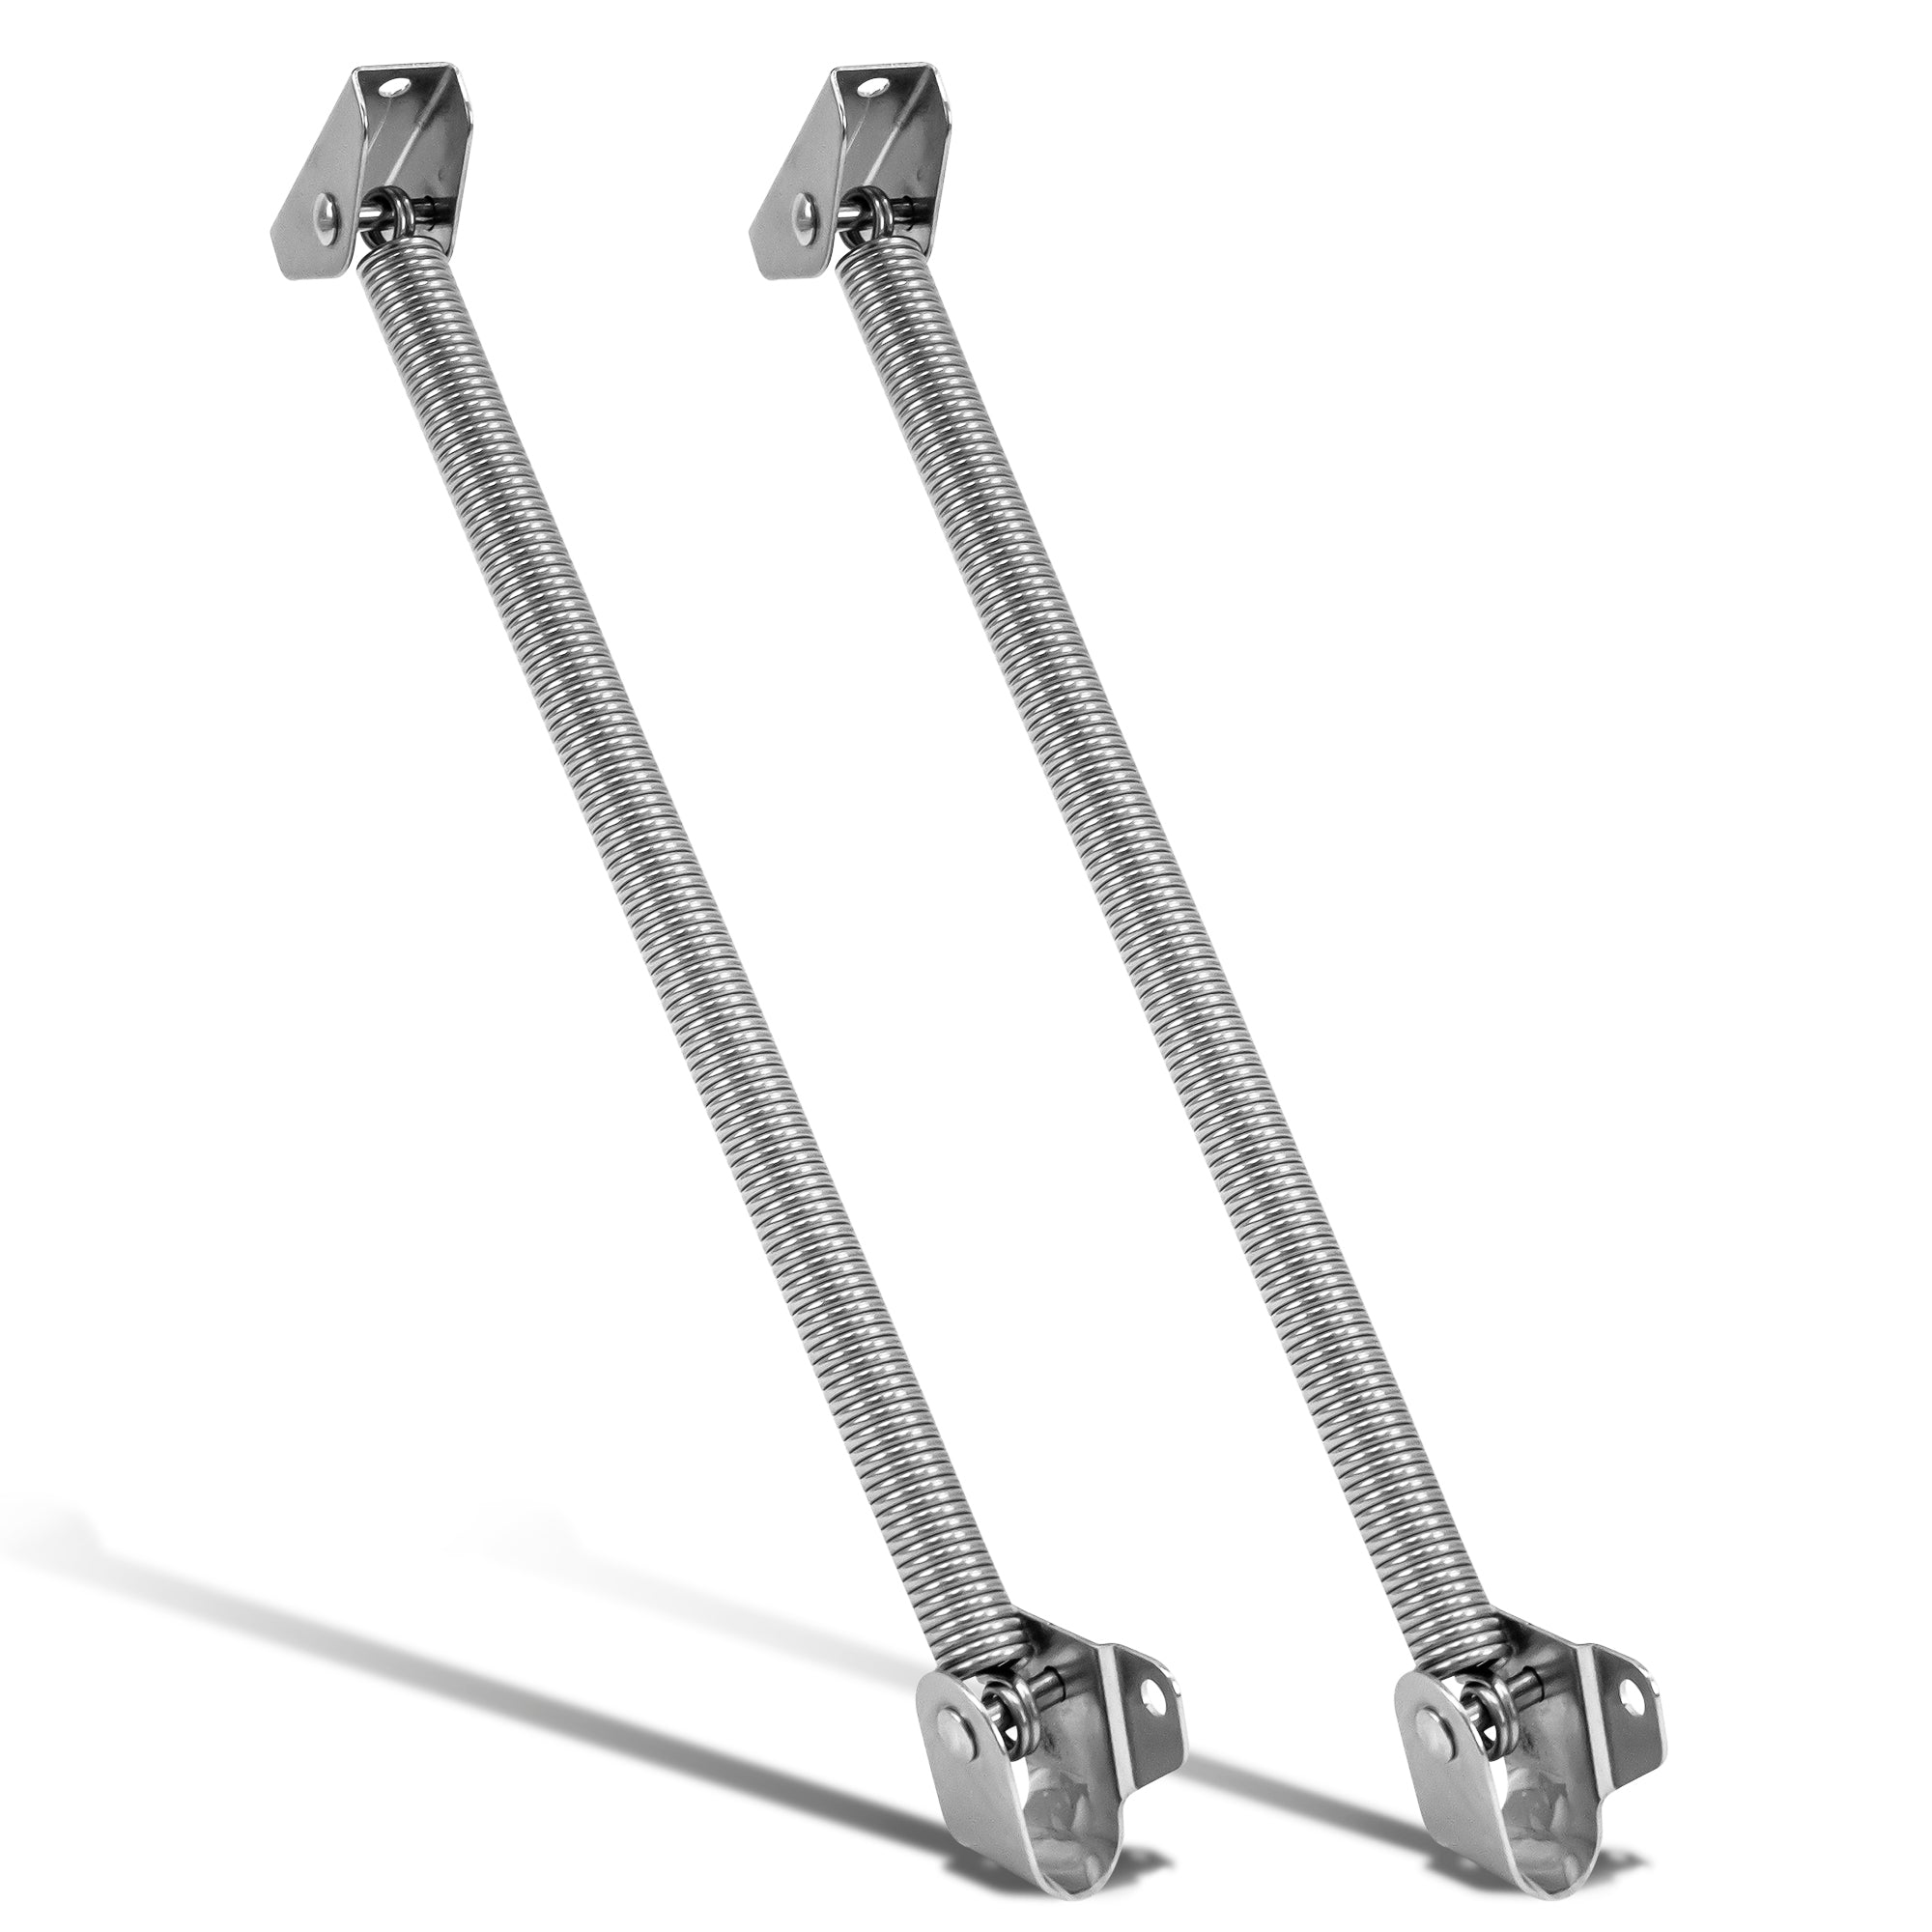 Hatch Lid Support Spring 8", Stainless Steel, 2-Pack - FO2884-M4